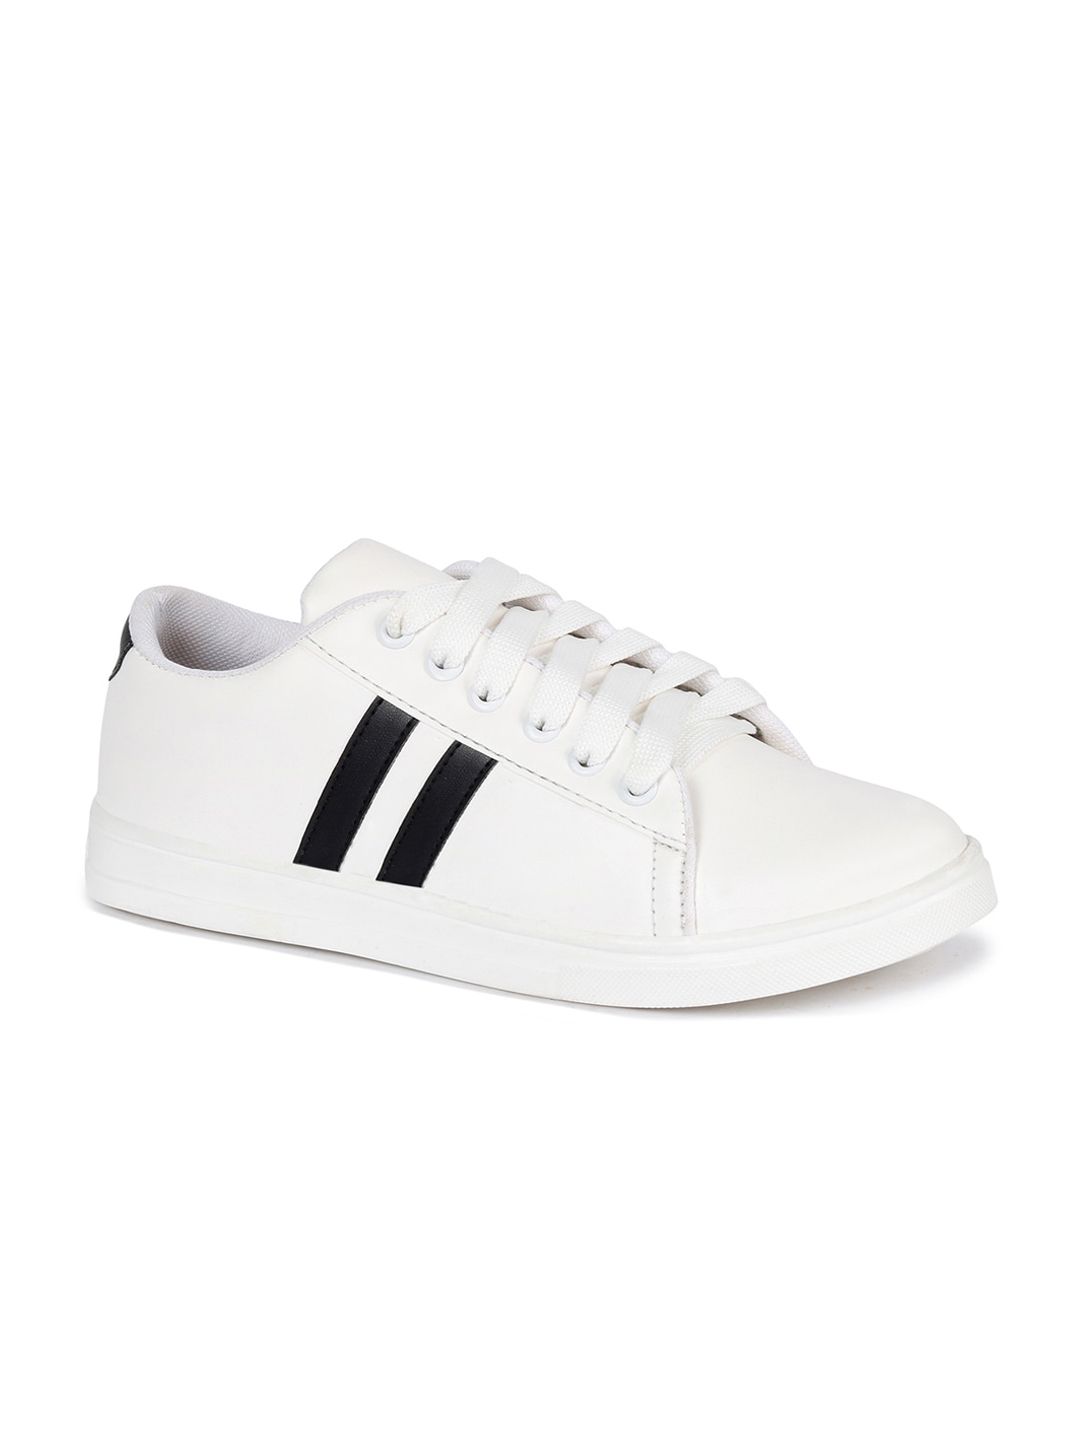 Bella Toes Women White & Black Striped Sneakers Price in India